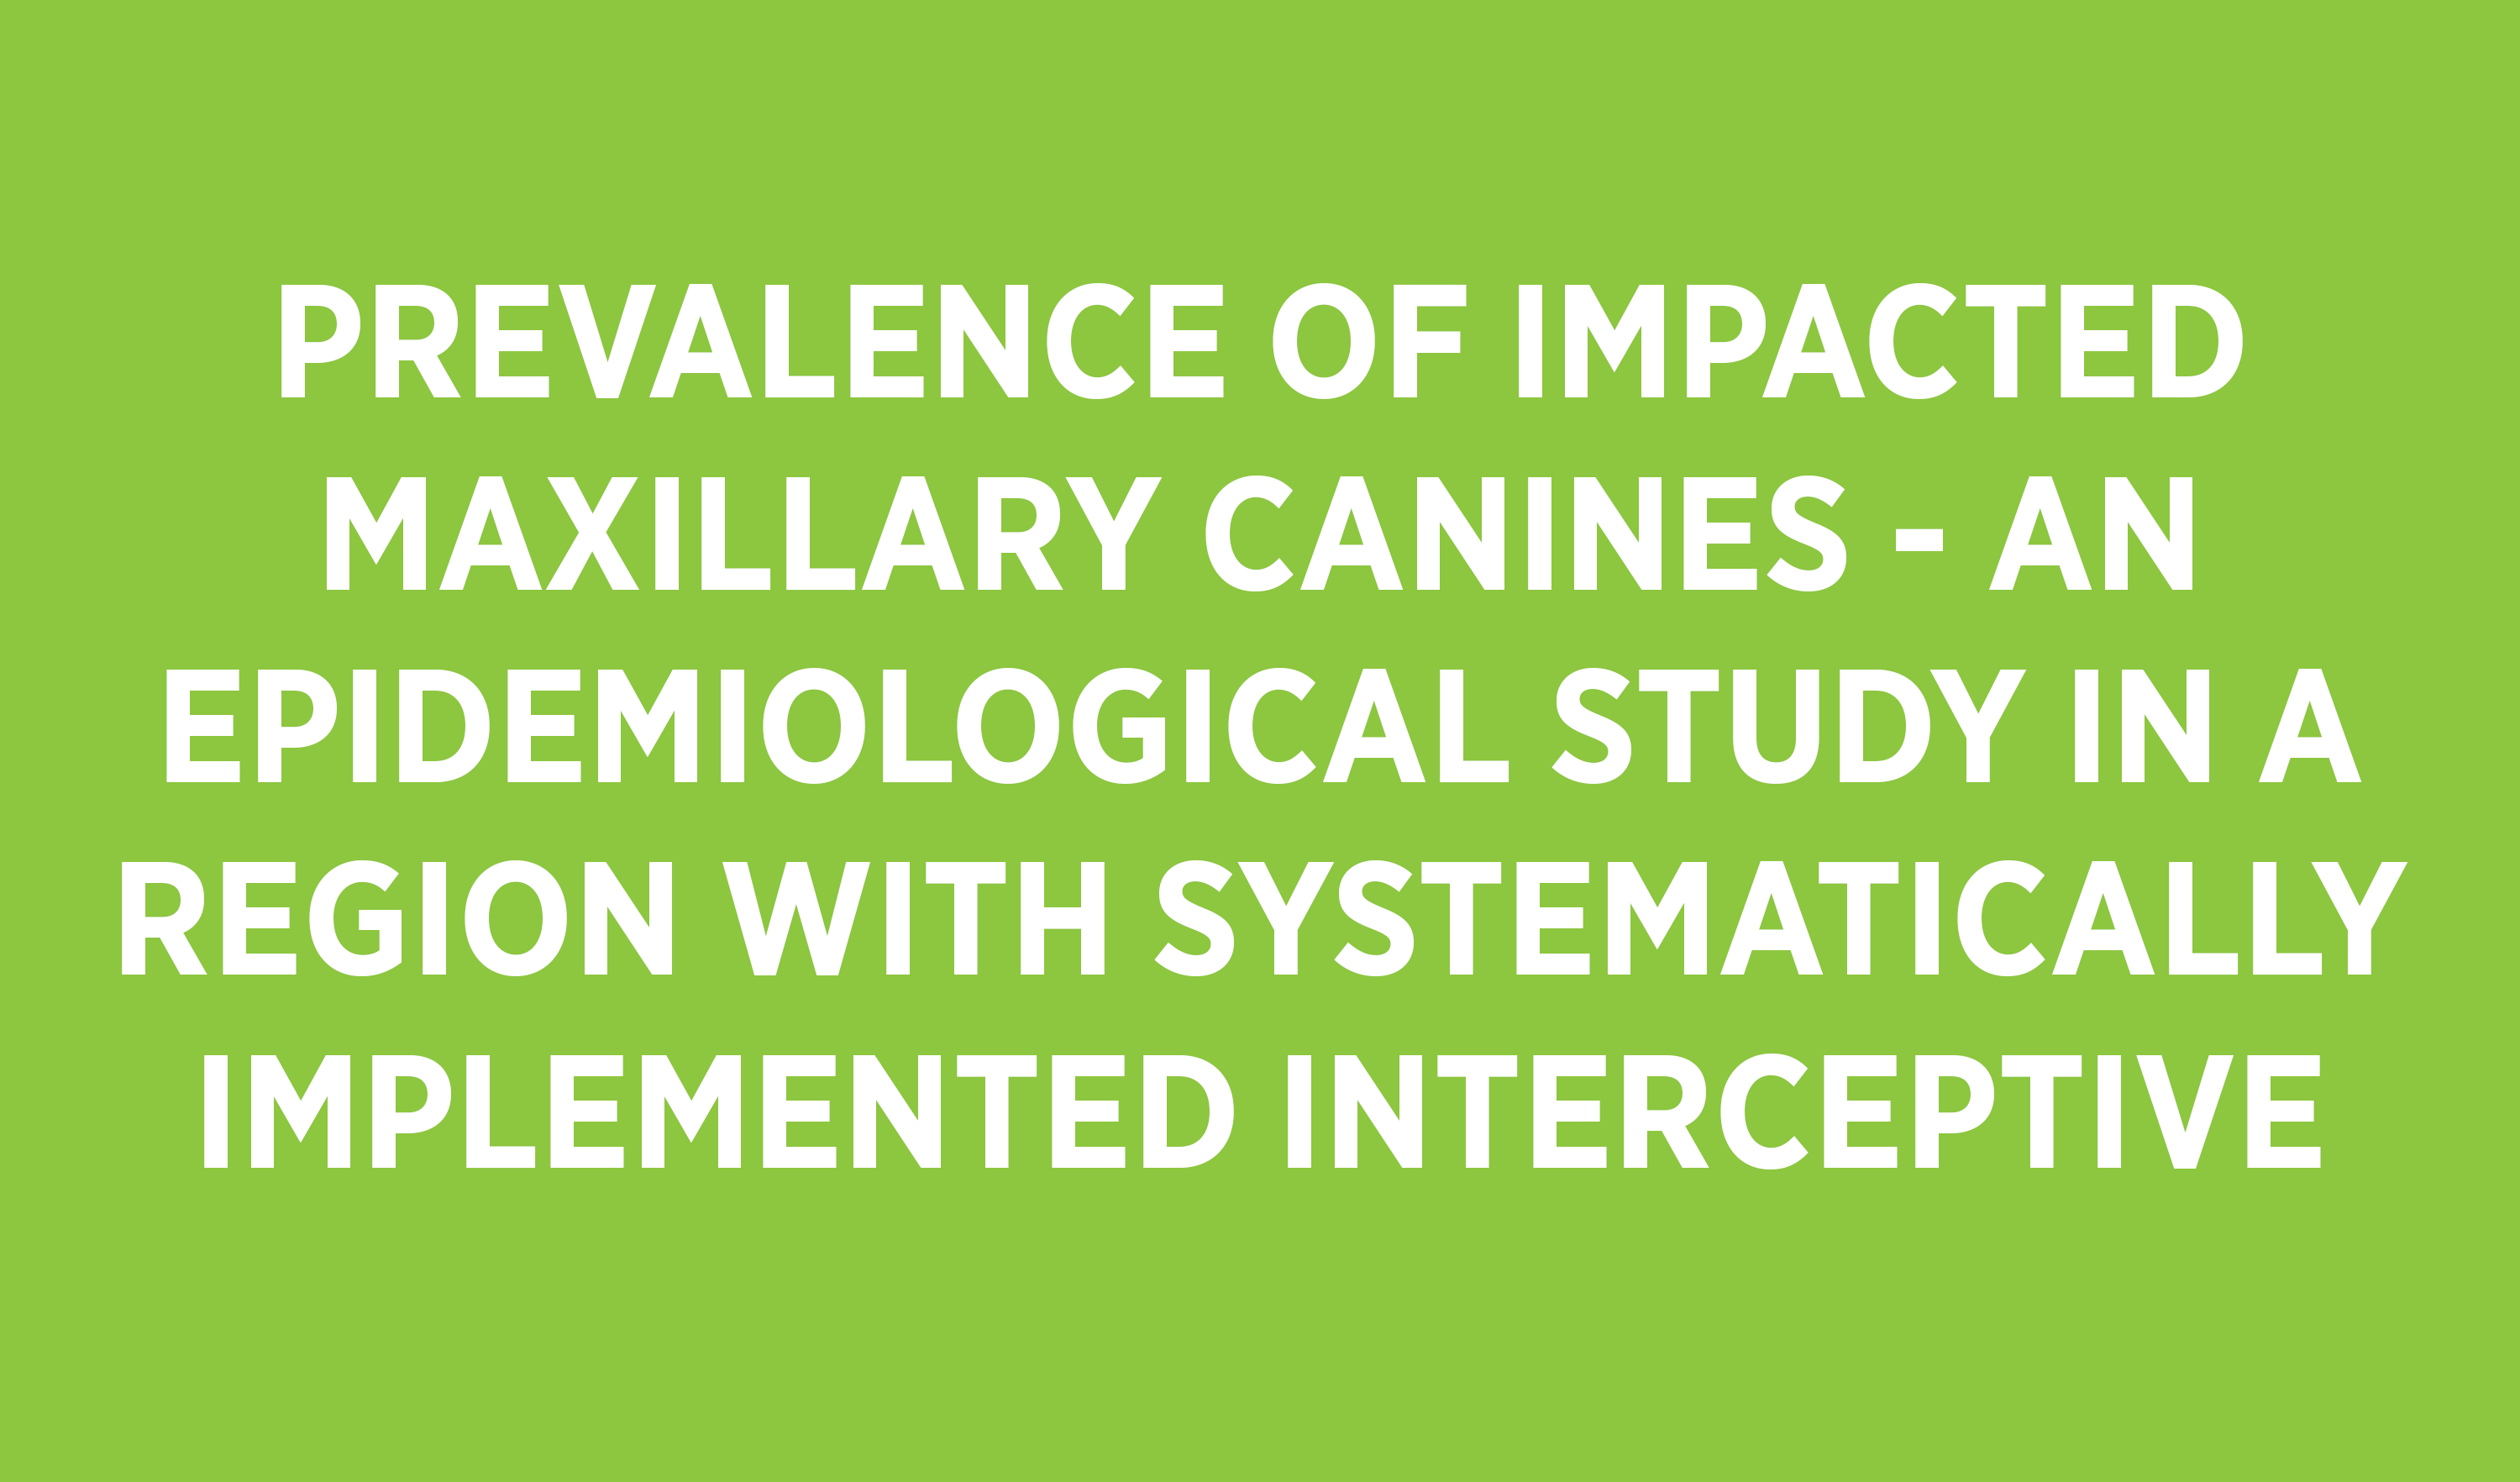 Grön puff med texten "Prevalence of impacted maxillary canines-an epidemiological study in a region with systematically implemented interceptive treatment"